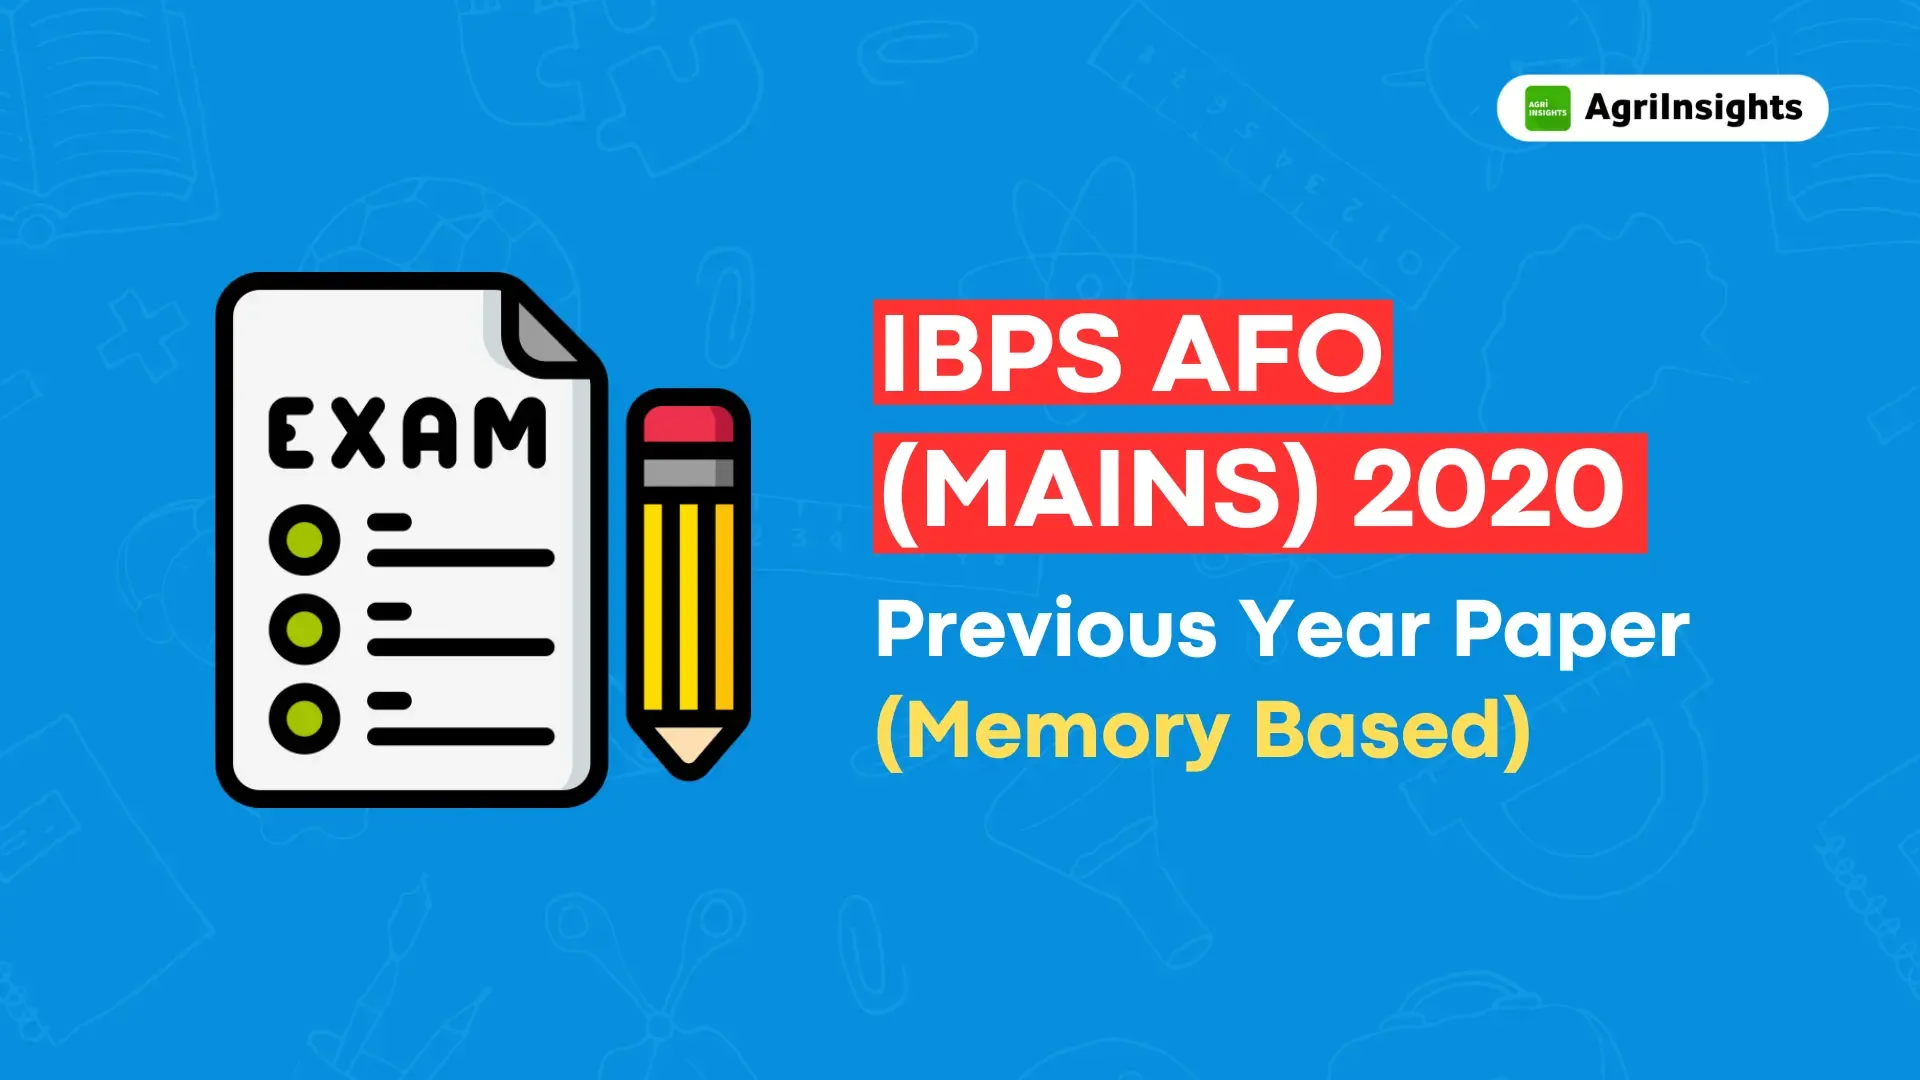 IBPS AFO Mains 2020 Solved Previous Year Paper